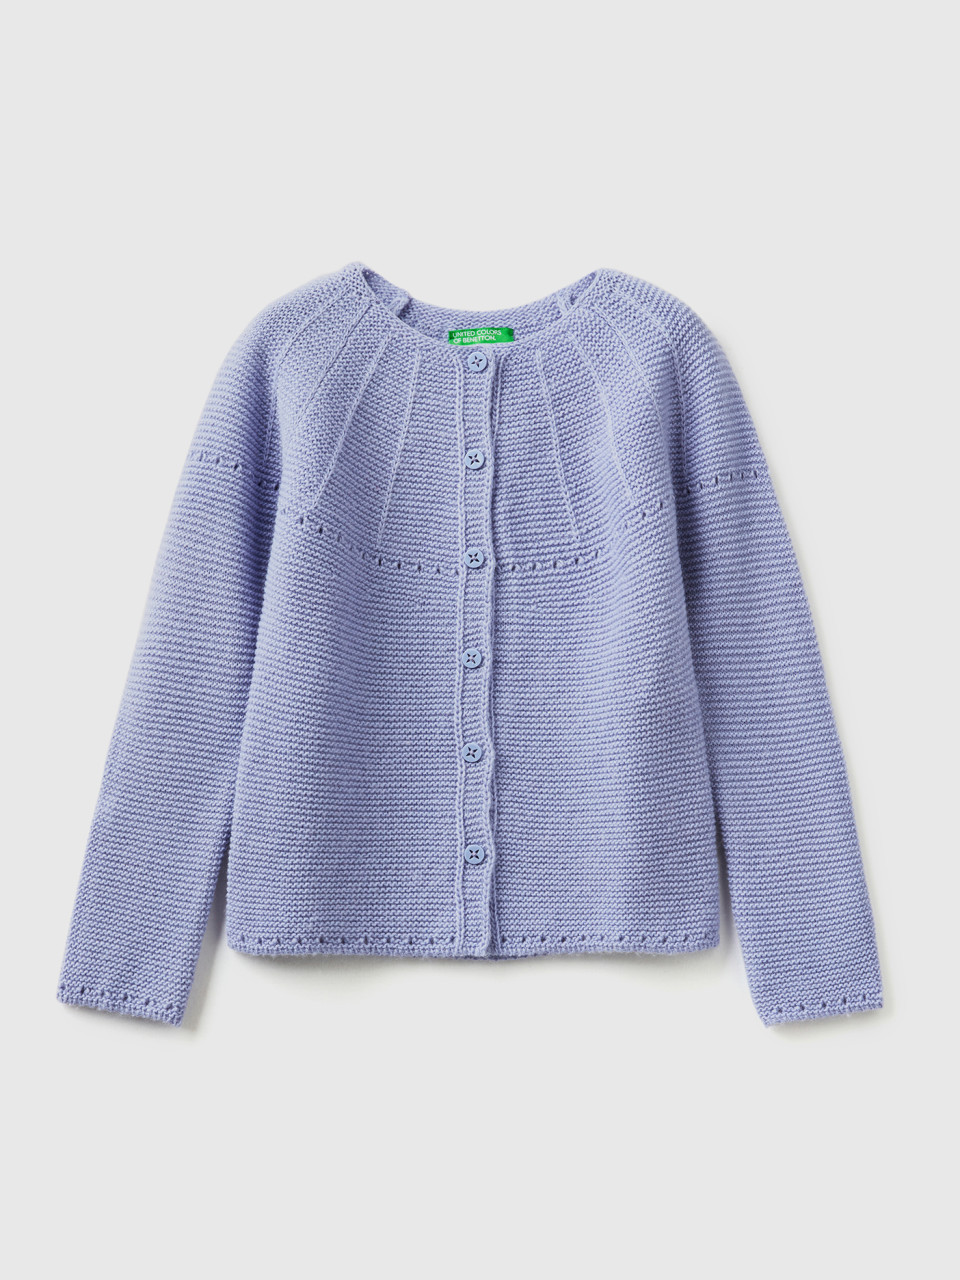 Benetton, Cardigan With Perforated Details, Lilac, Kids